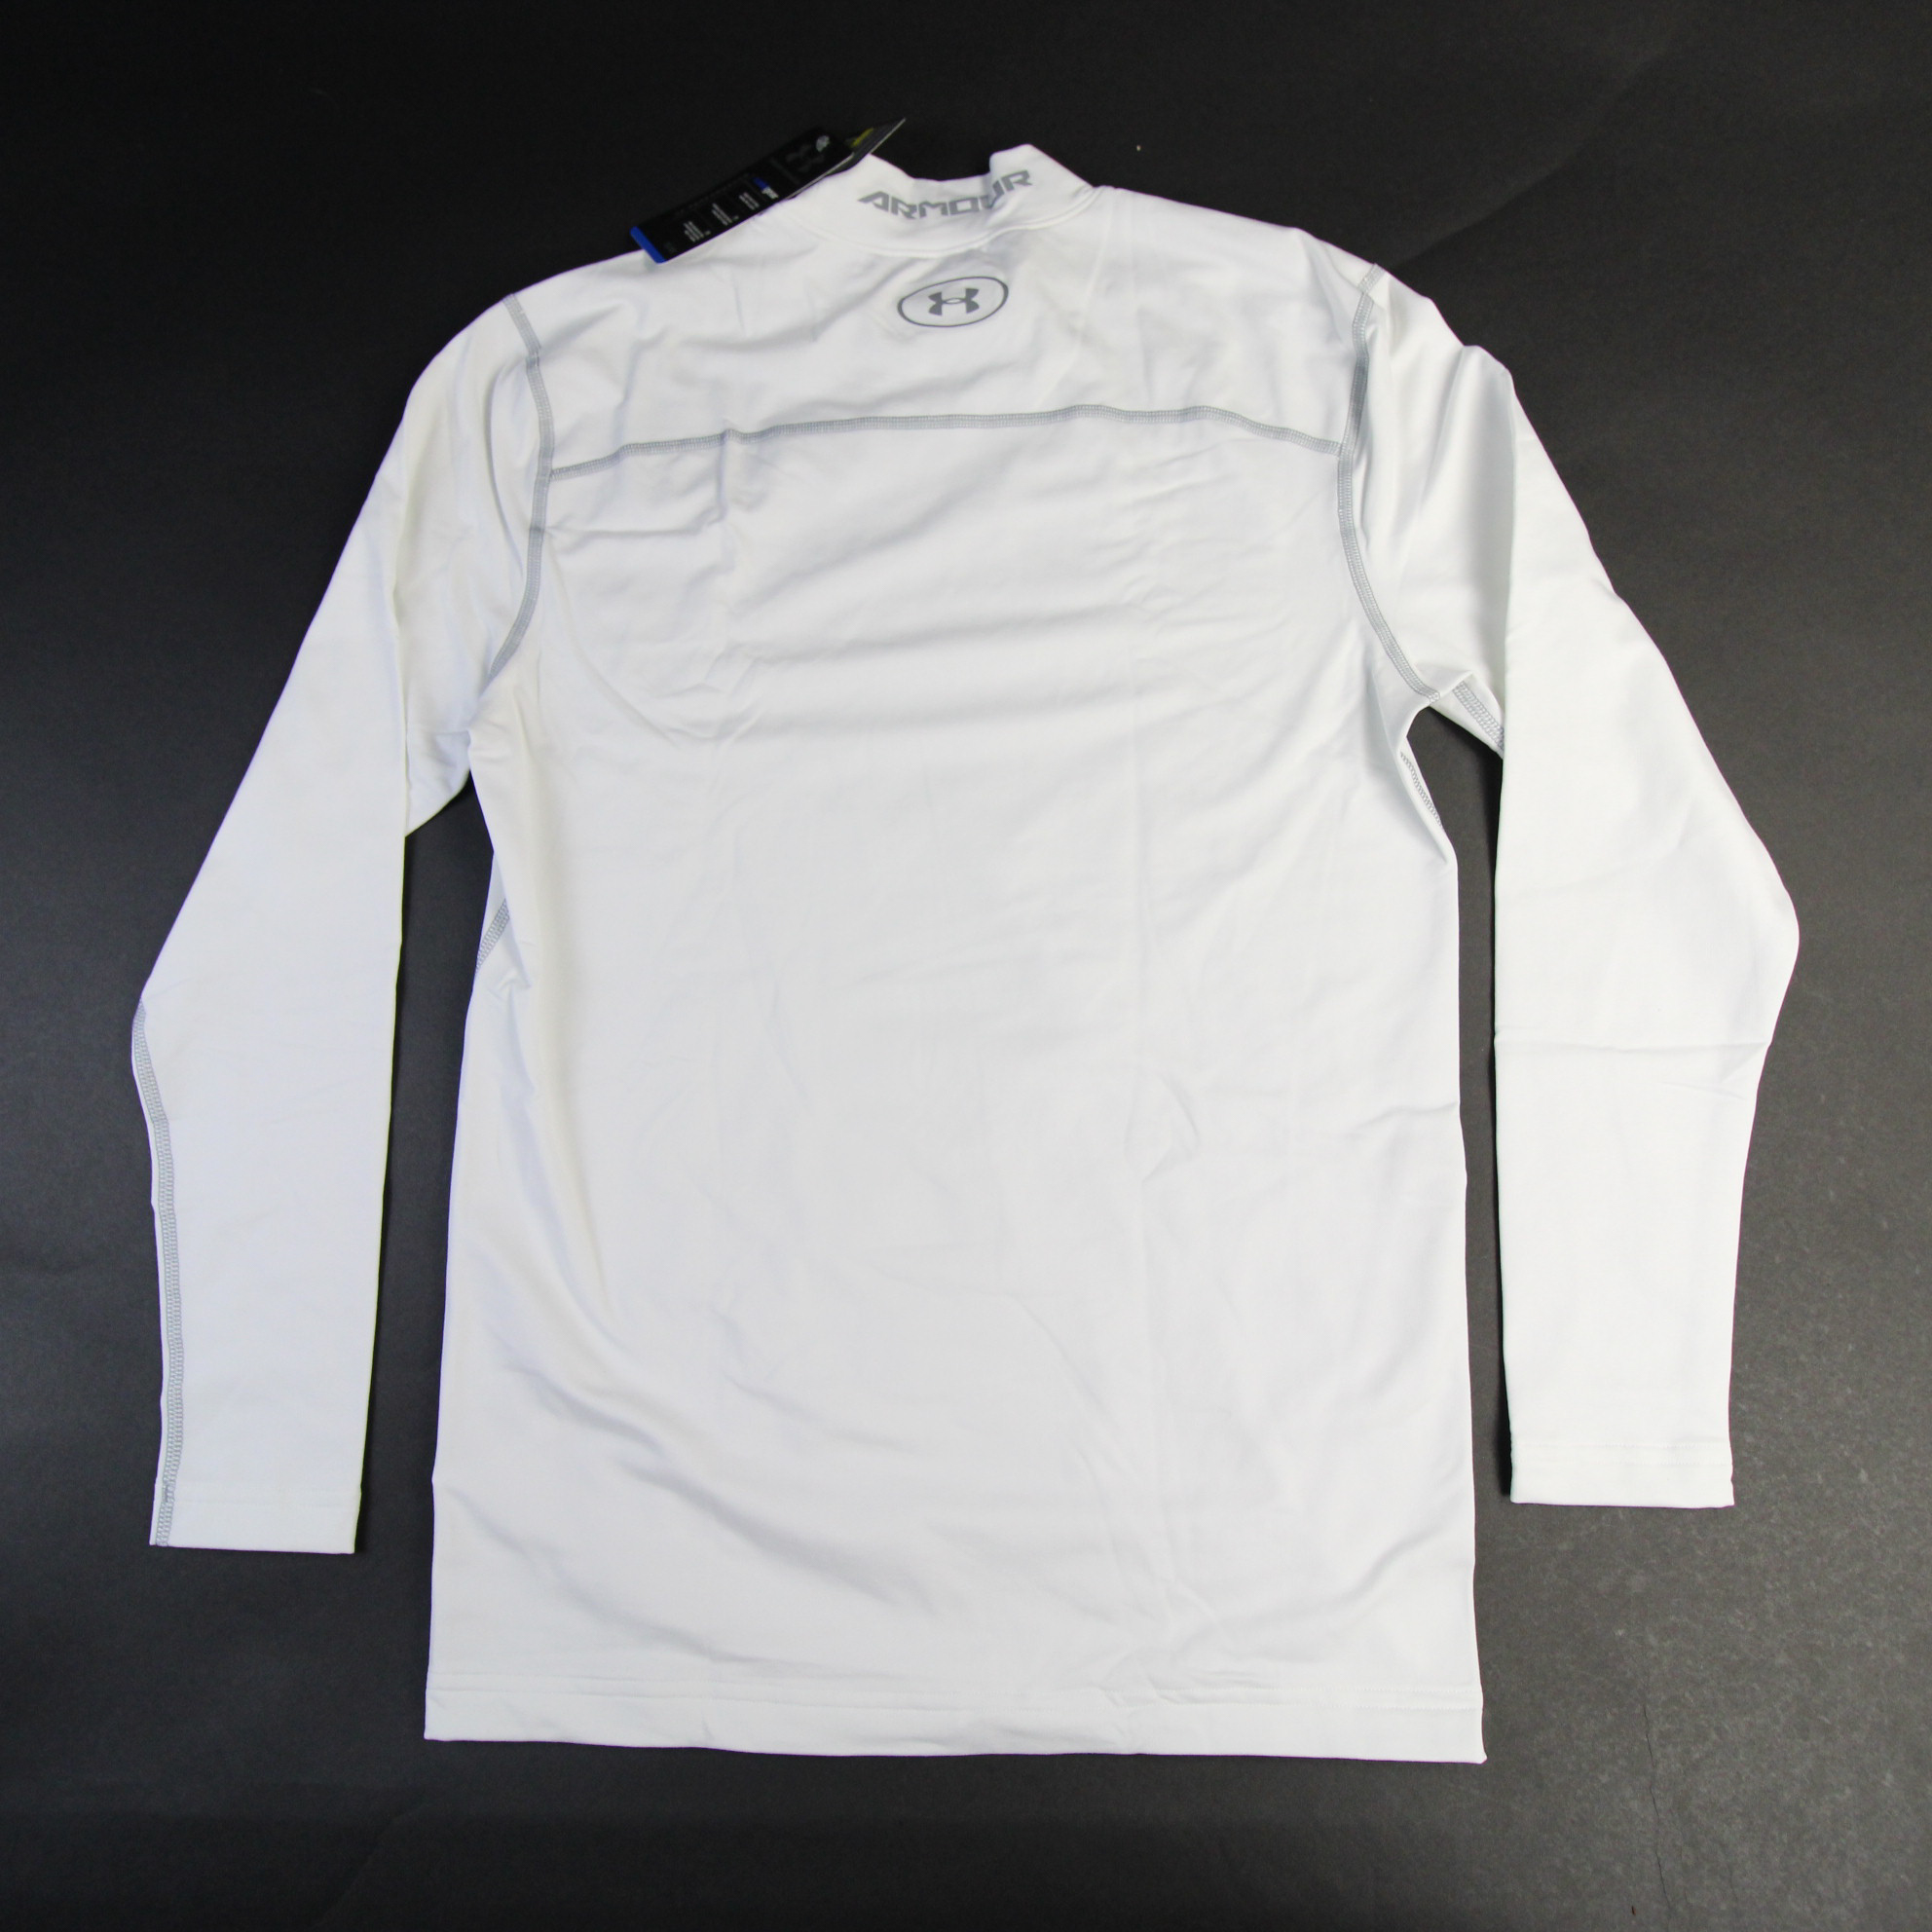 Under Armour ColdGear Compression Top Men's White New with Tags